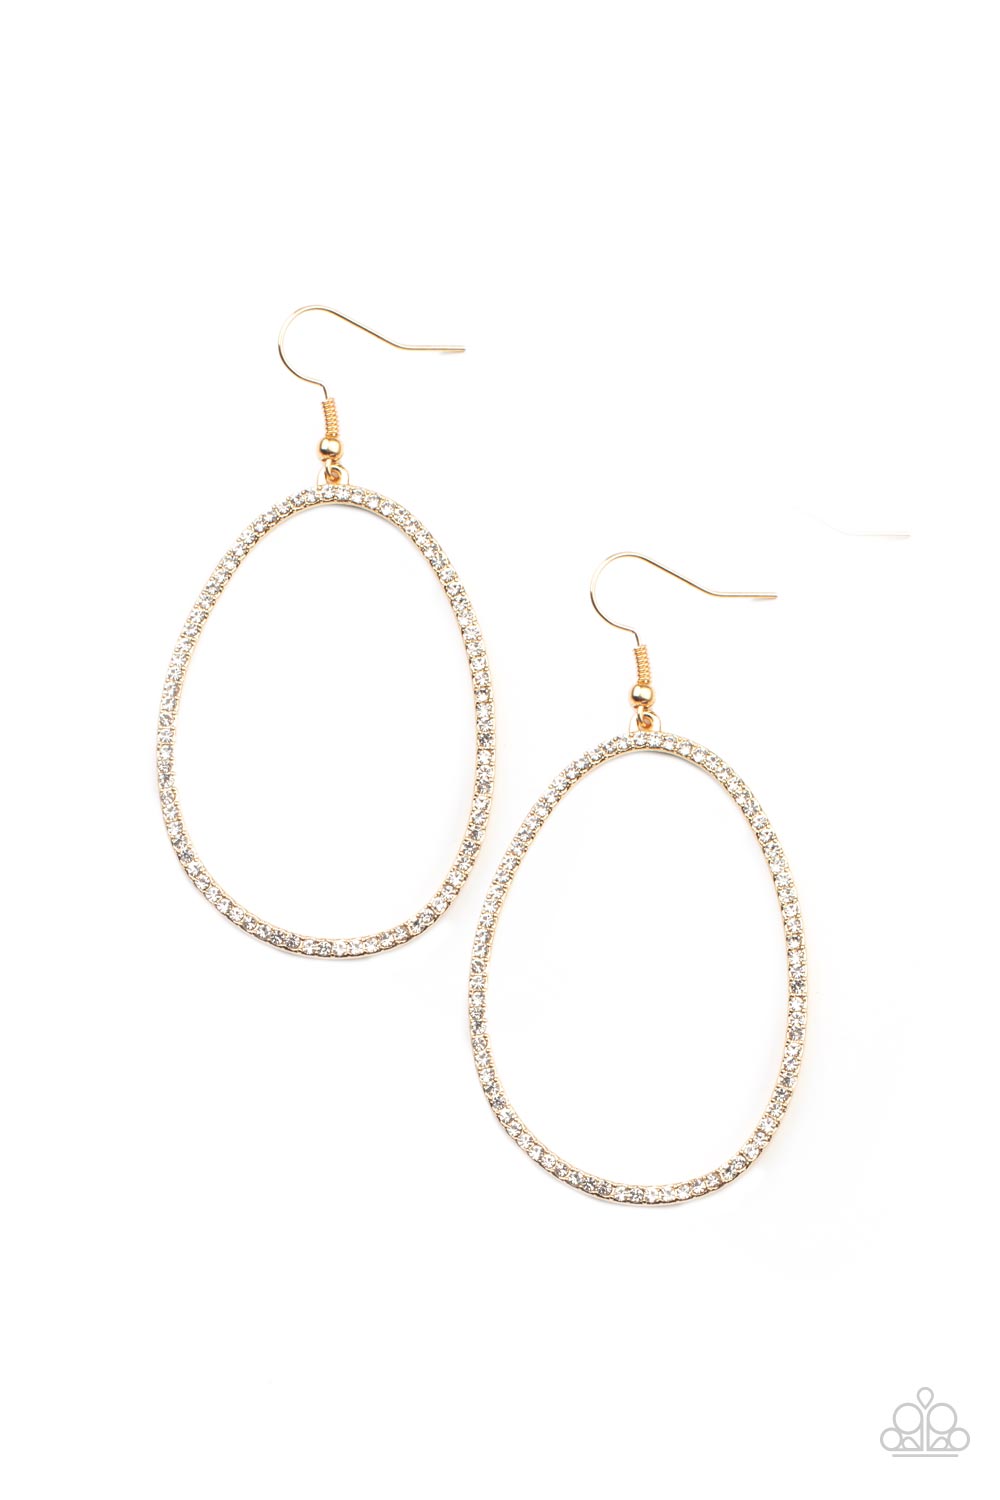 Paparazzi Accessories - Dotted in dainty white rhinestones, an asymmetrical oval gold frame swings from the ear for a sassy look.